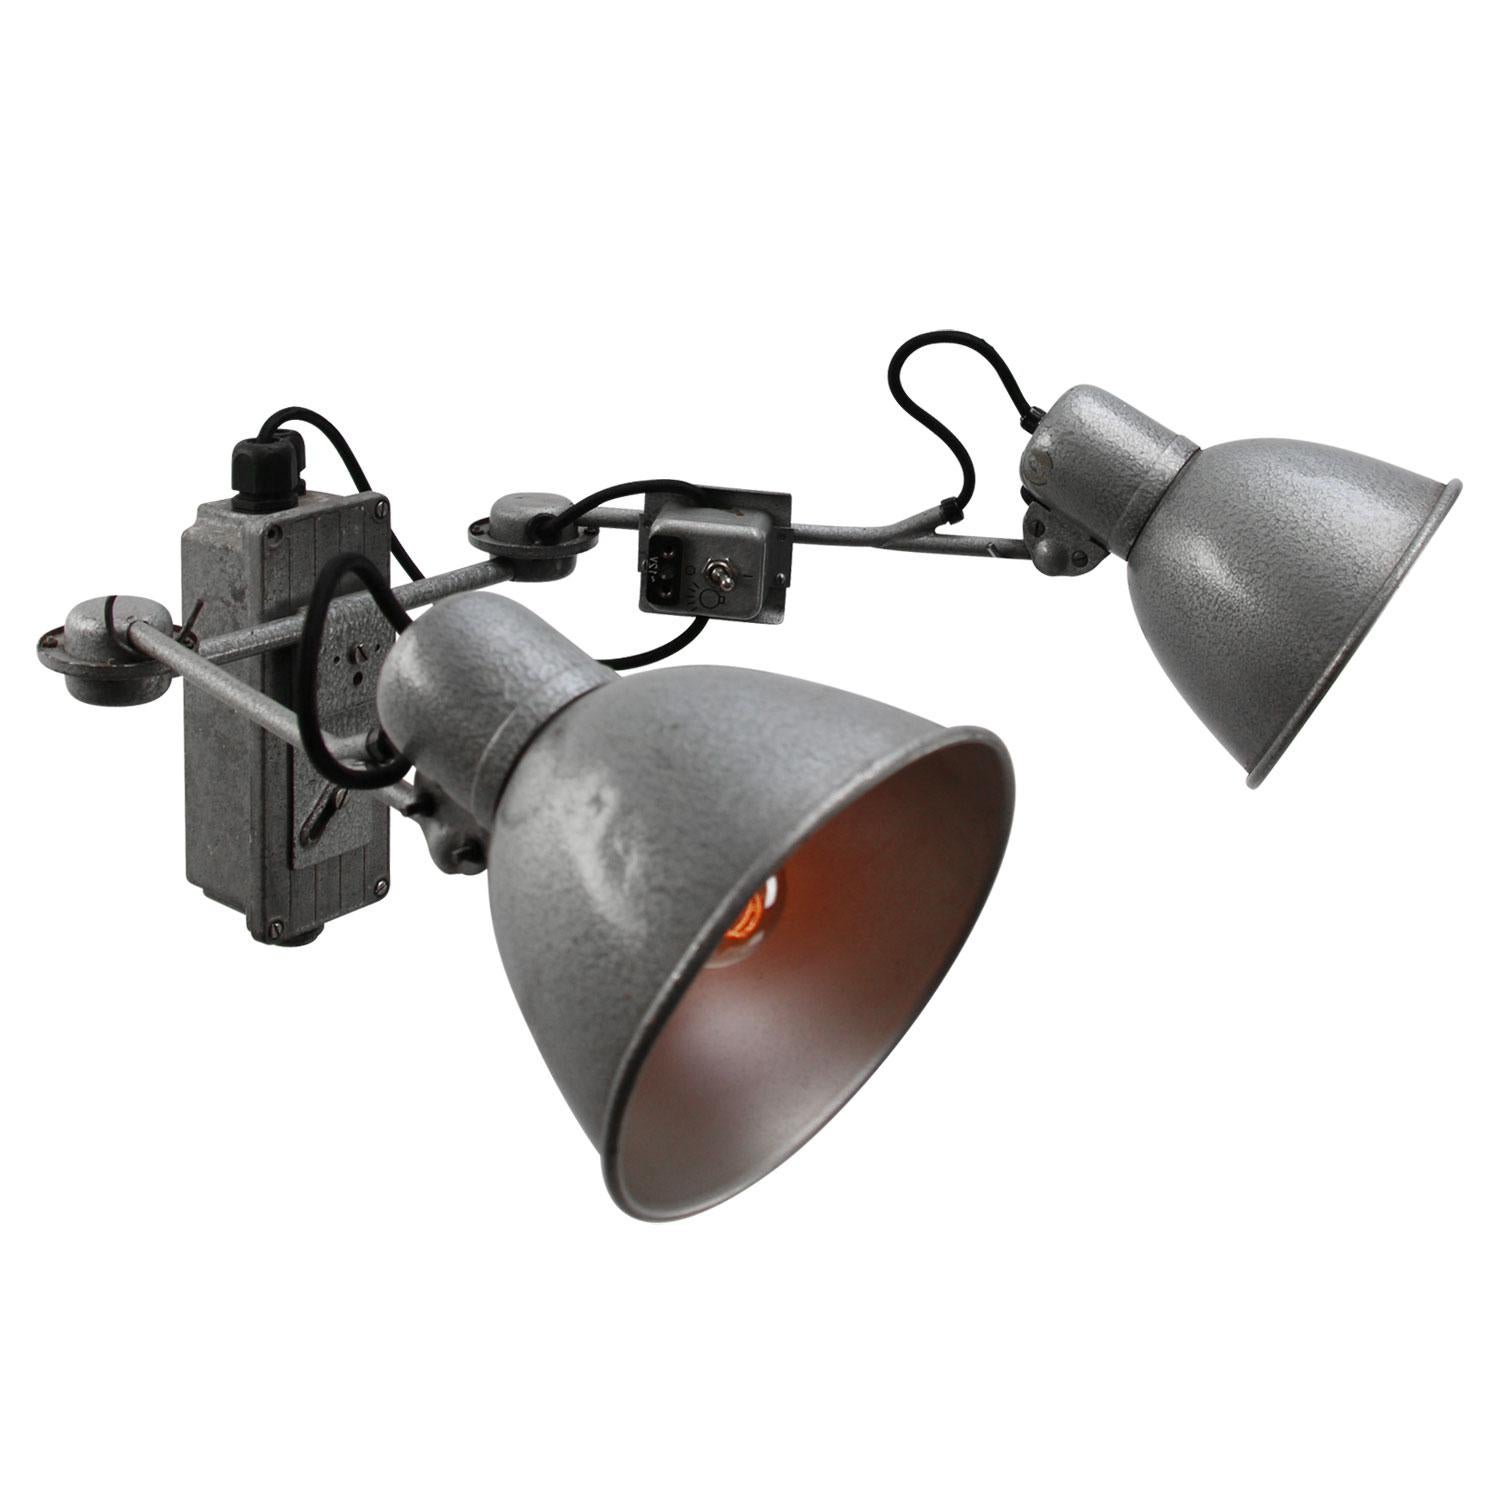 German double photography wall lights
Aluminum and metal

Weight: 1.80 kg / 4 lb

Priced per individual item. All lamps have been made suitable by international standards for incandescent light bulbs, energy-efficient and LED bulbs. E26/E27